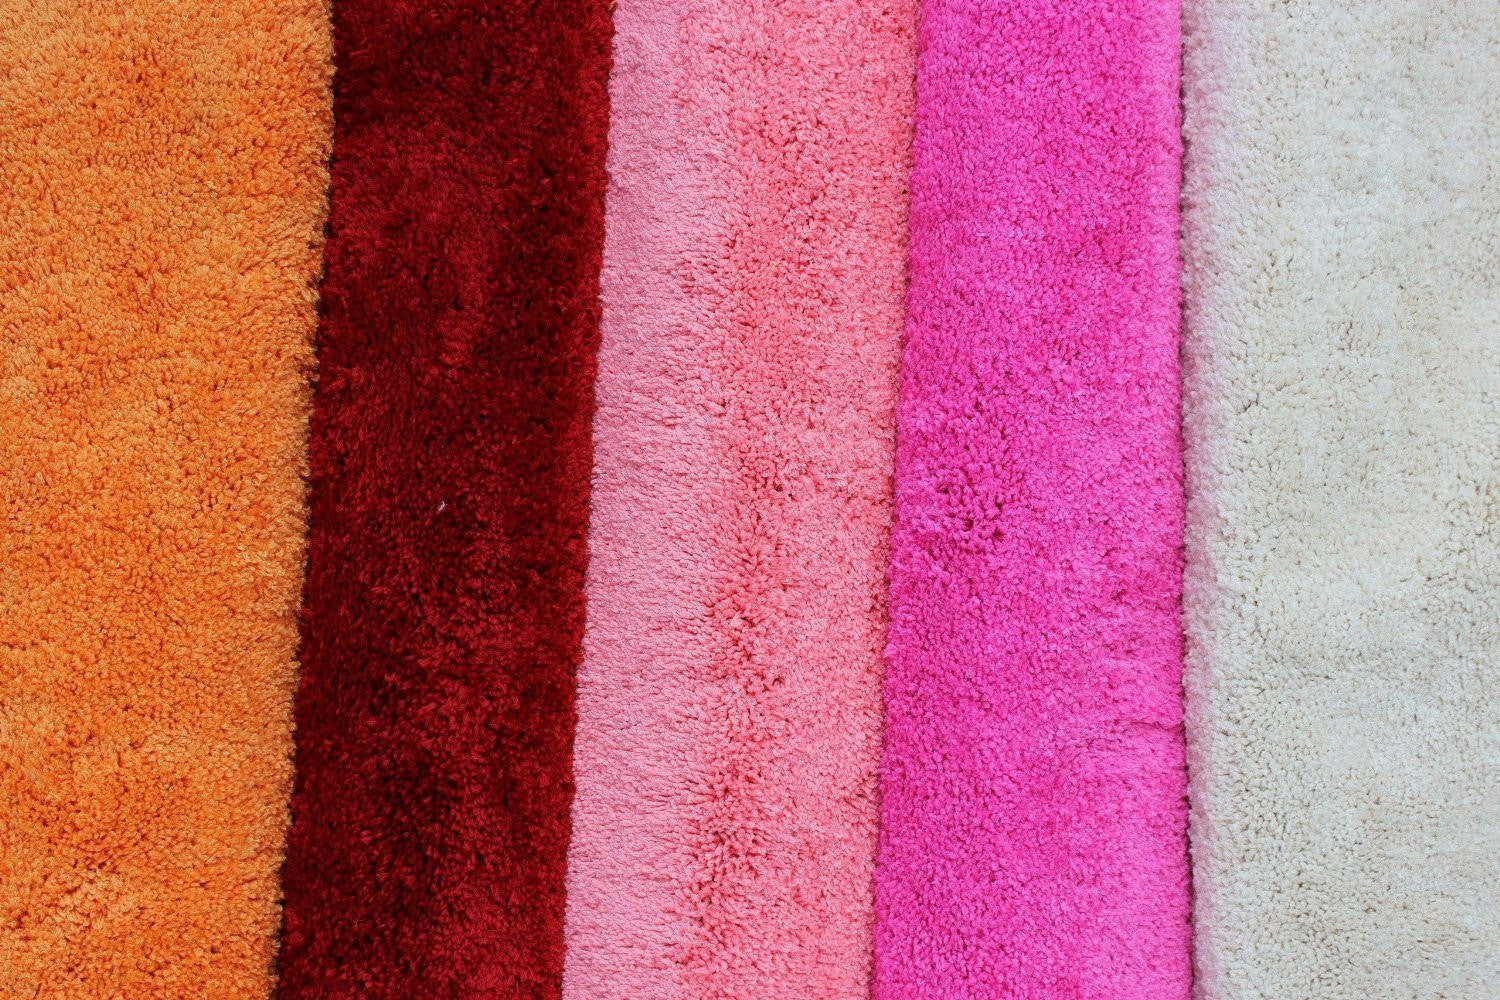 https://cdn.shopify.com/s/files/1/0206/7352/products/rugs-tache-solid-salmon-coral-pink-thin-rug-2.jpg?v=1579878505&width=1500